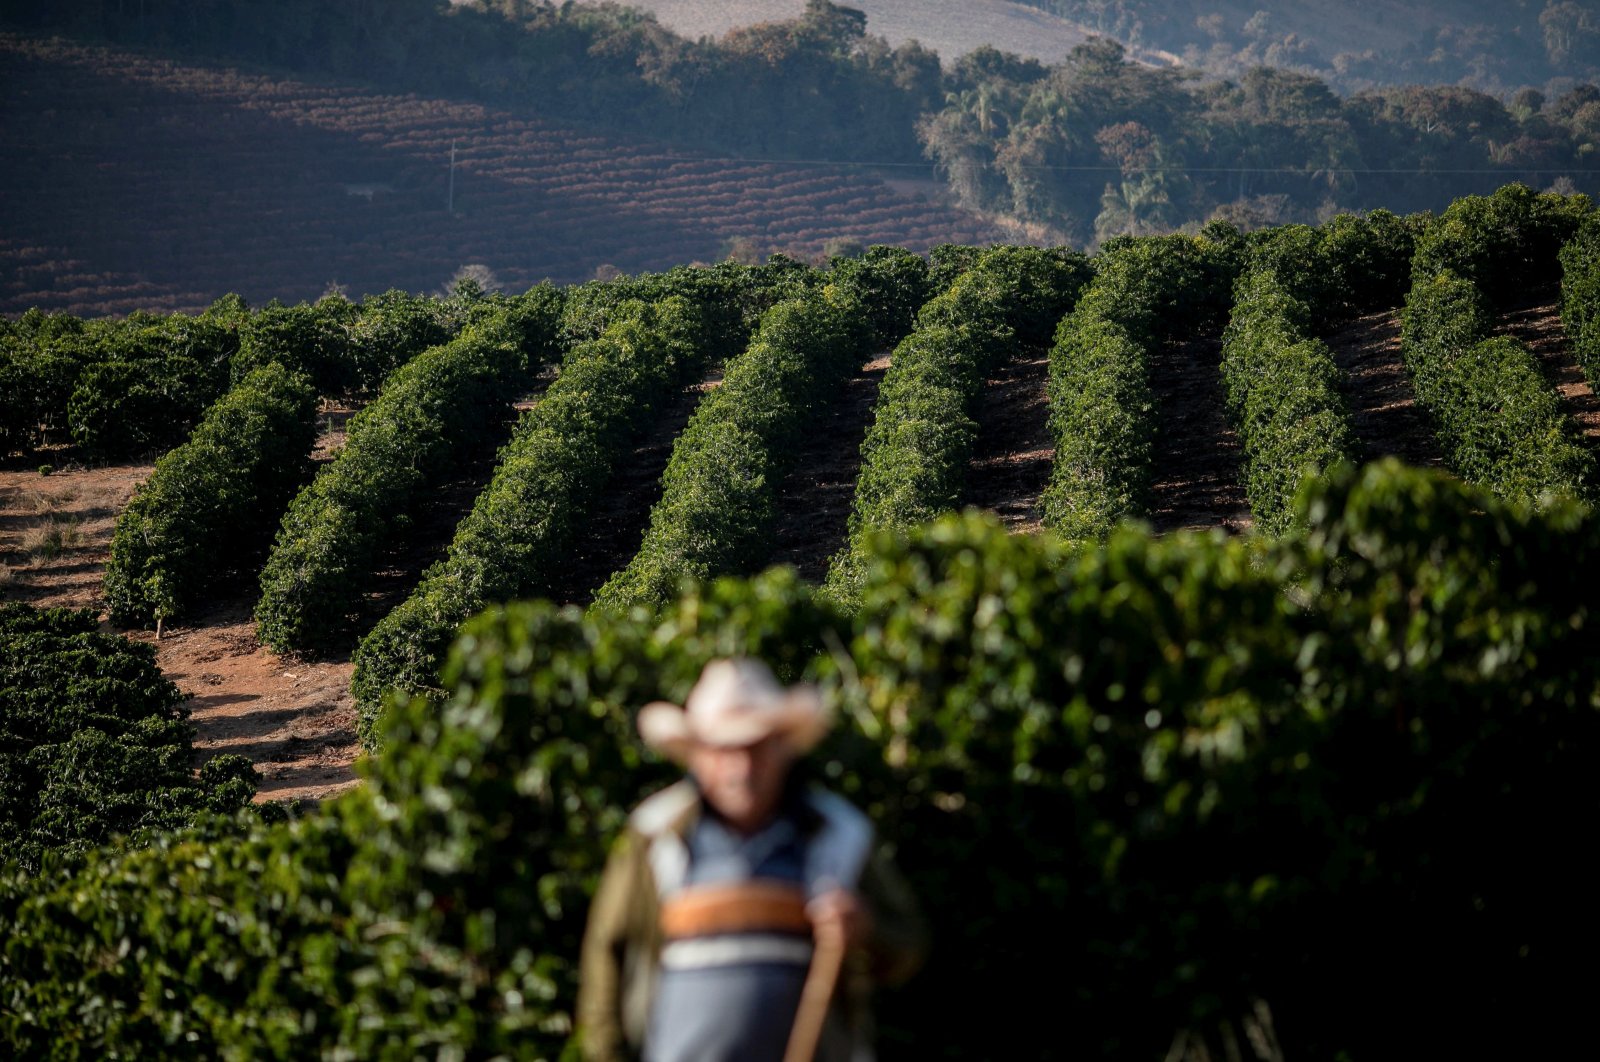 A man walks through a field of coffee crops that were affected by frosts in 2021 as a strong cold snap hit the south of the top Brazilian producer state Minas Gerais, in Varginha, Brazil, July 30, 2021. (REUTERS)